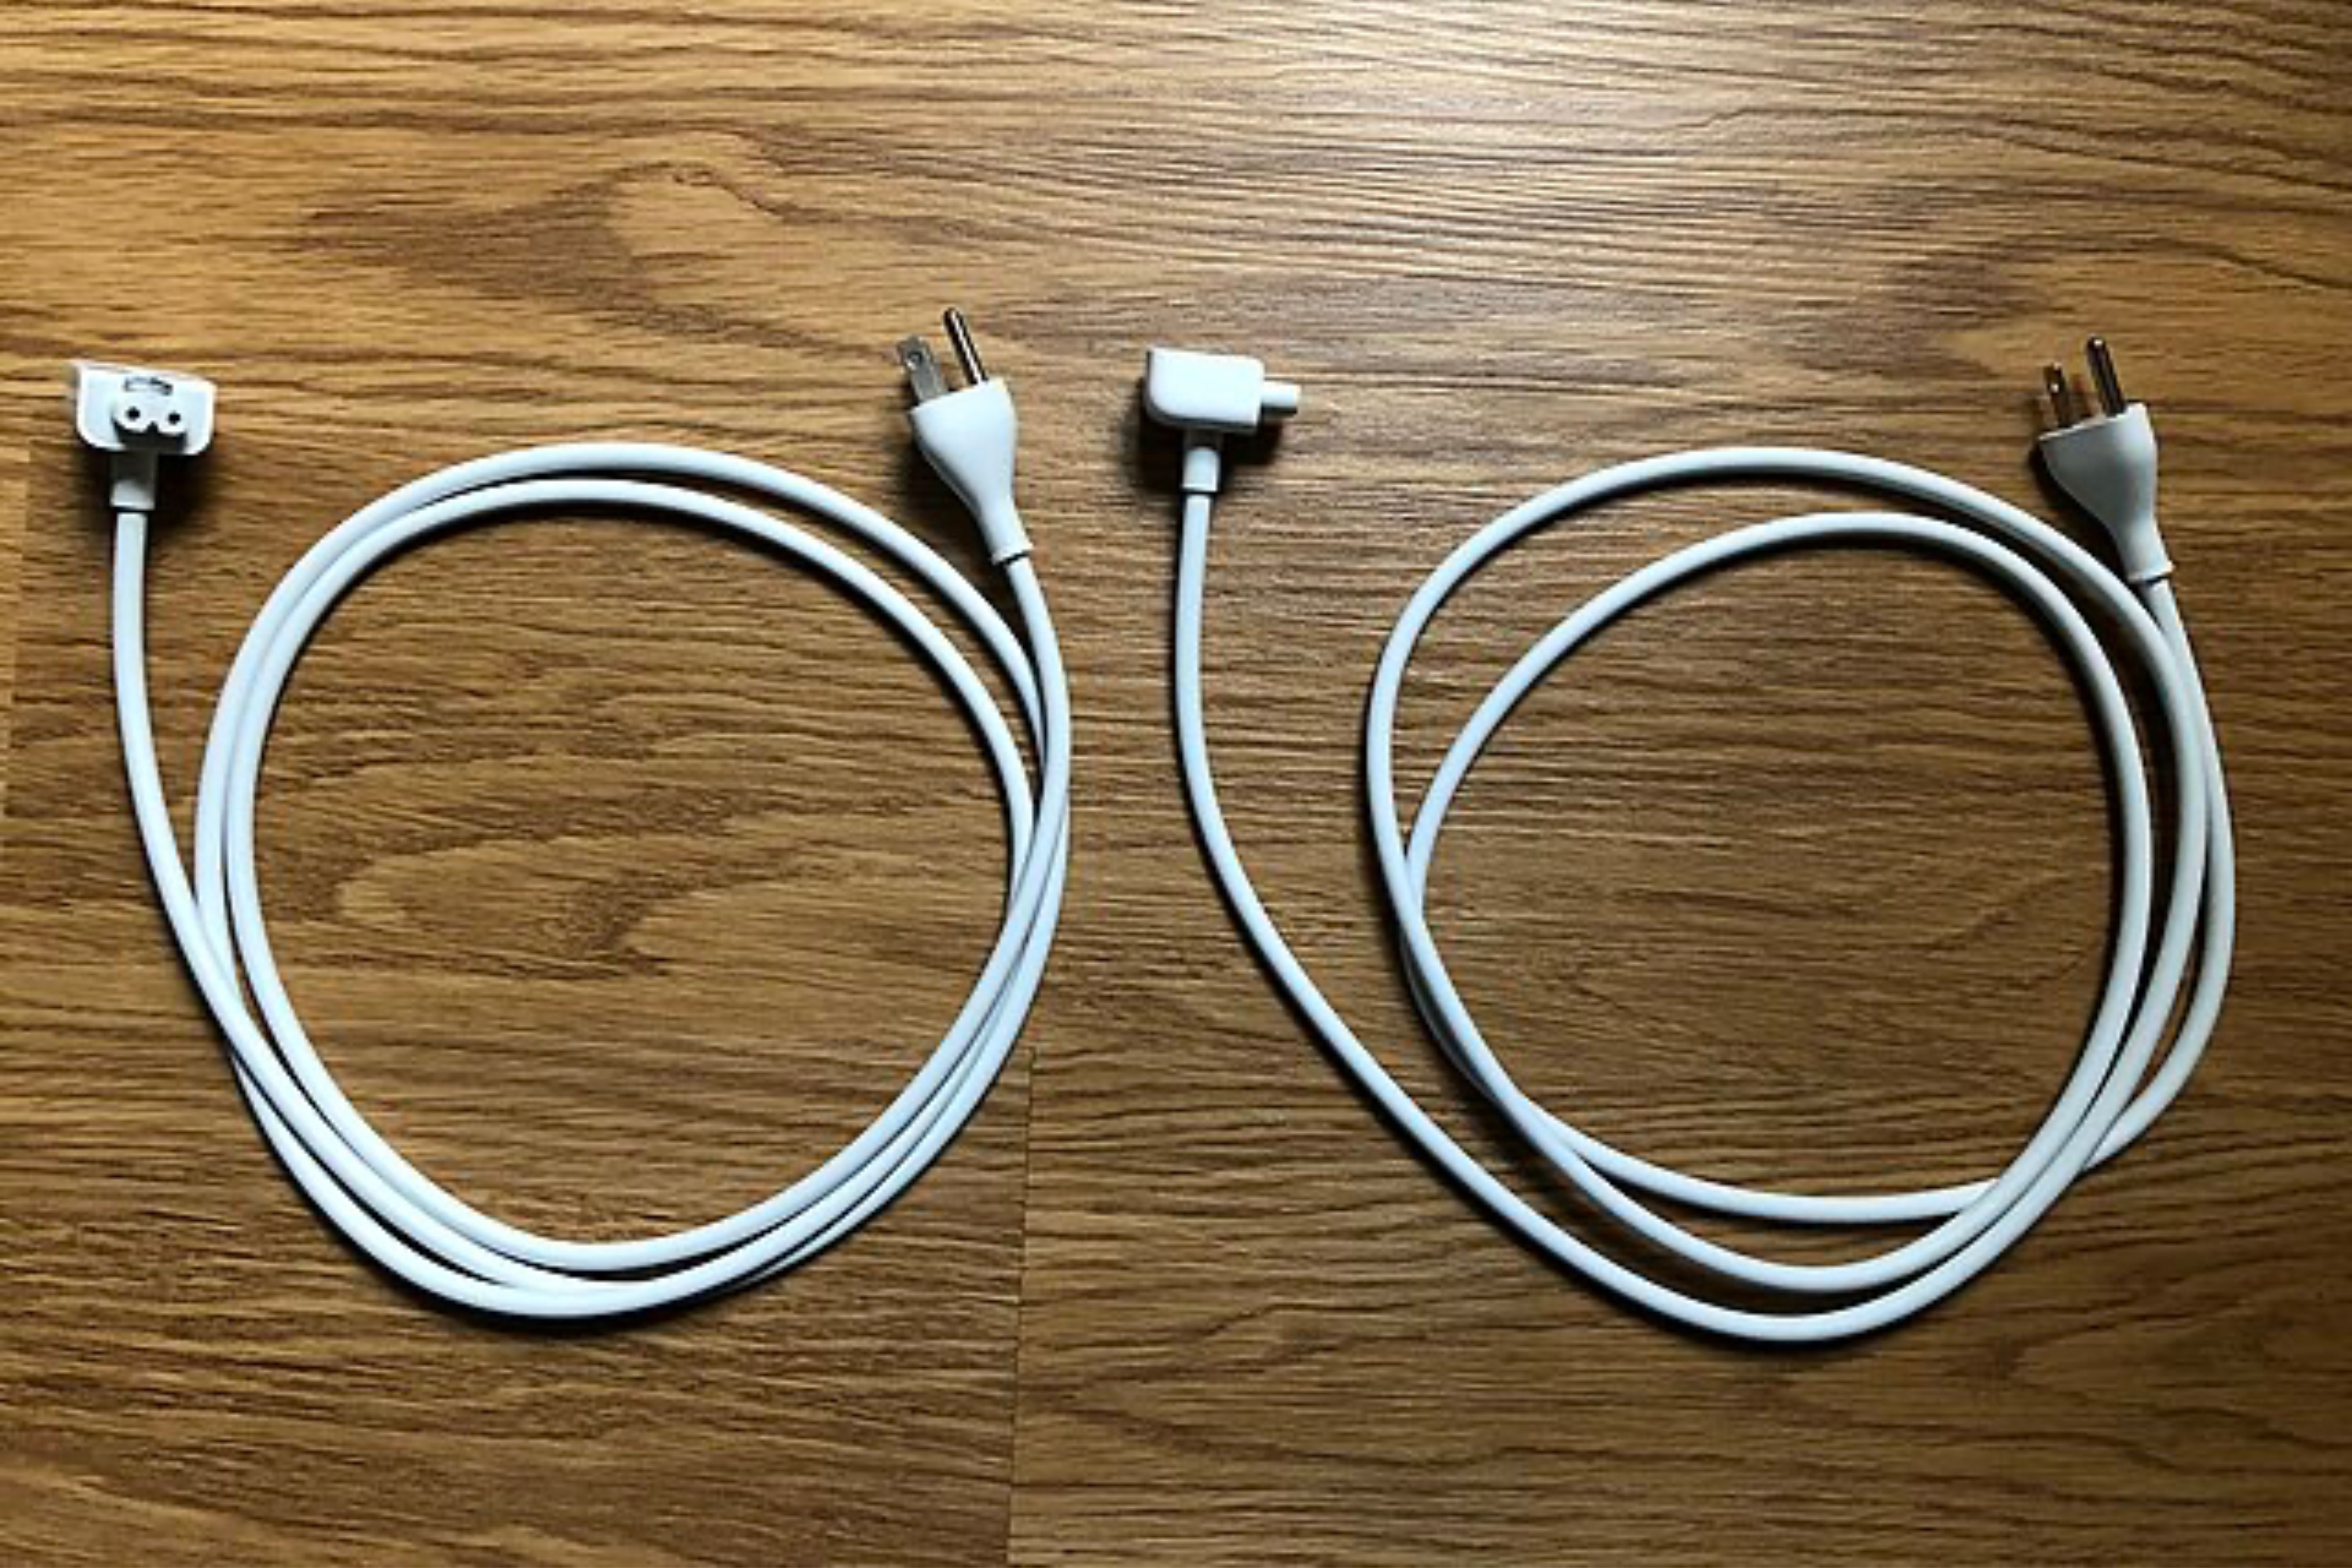 Two Apple power adapter extension cables on the floor.